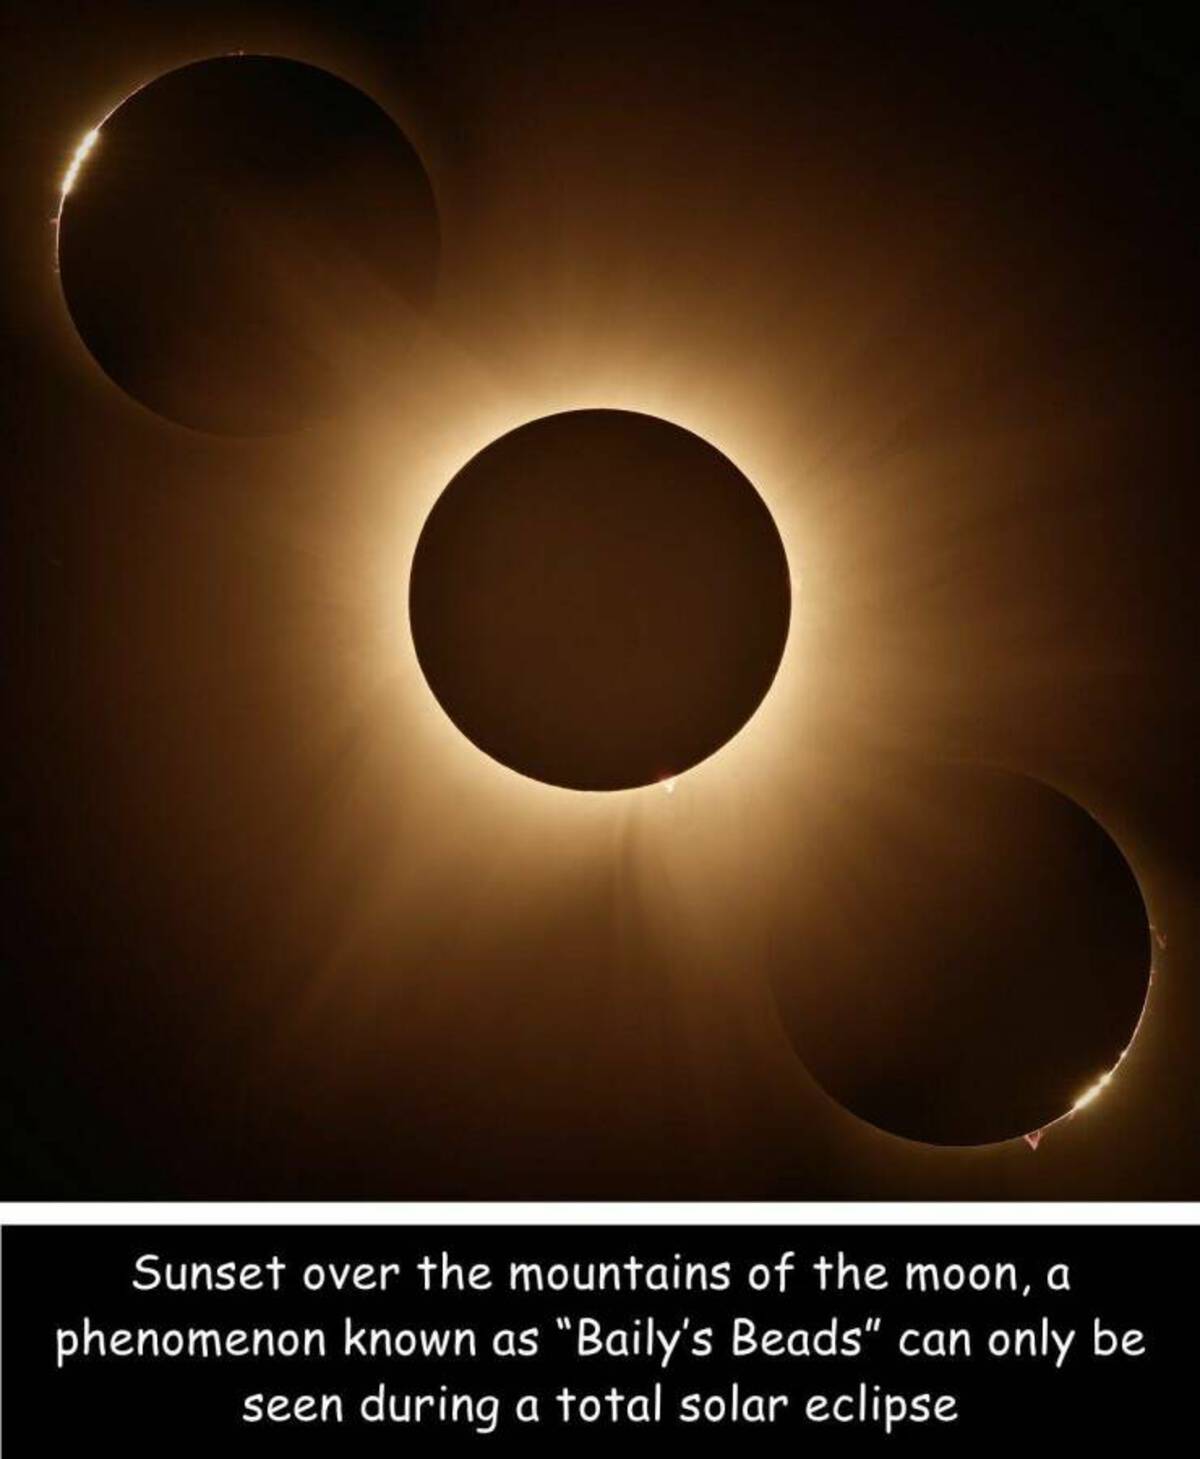 moon - Sunset over the mountains of the moon, a phenomenon known as